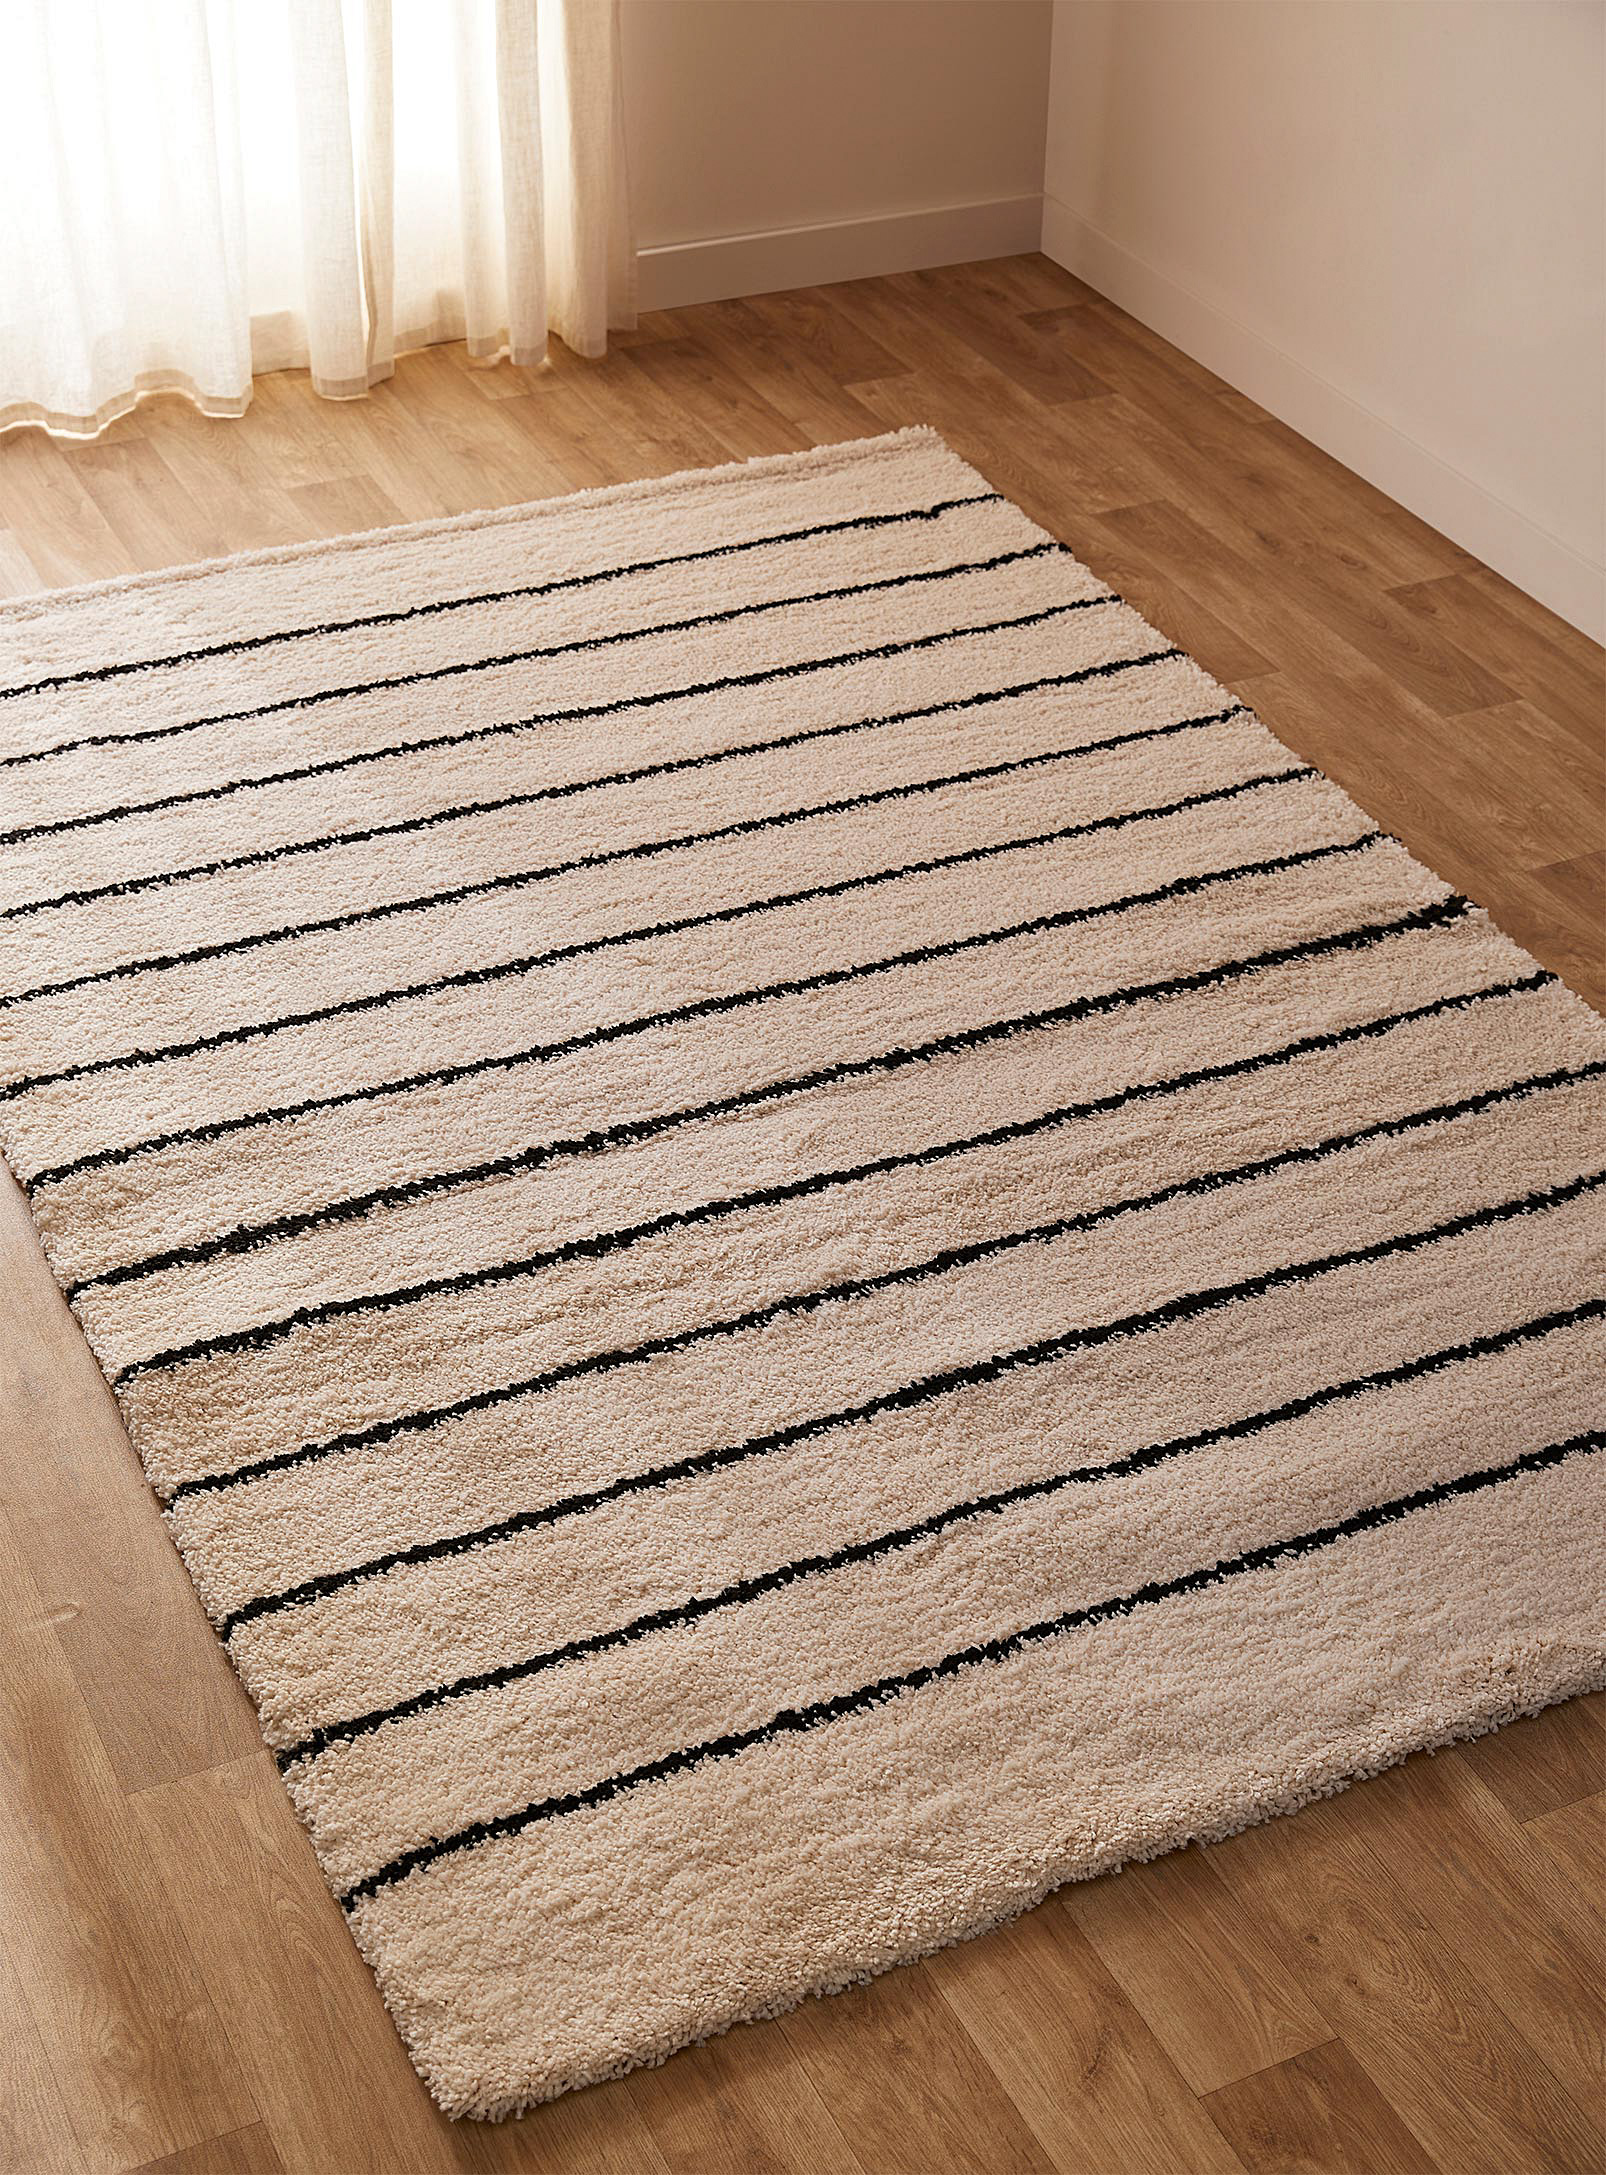 Simons Maison - Thin contrasting shag rug See available sizes